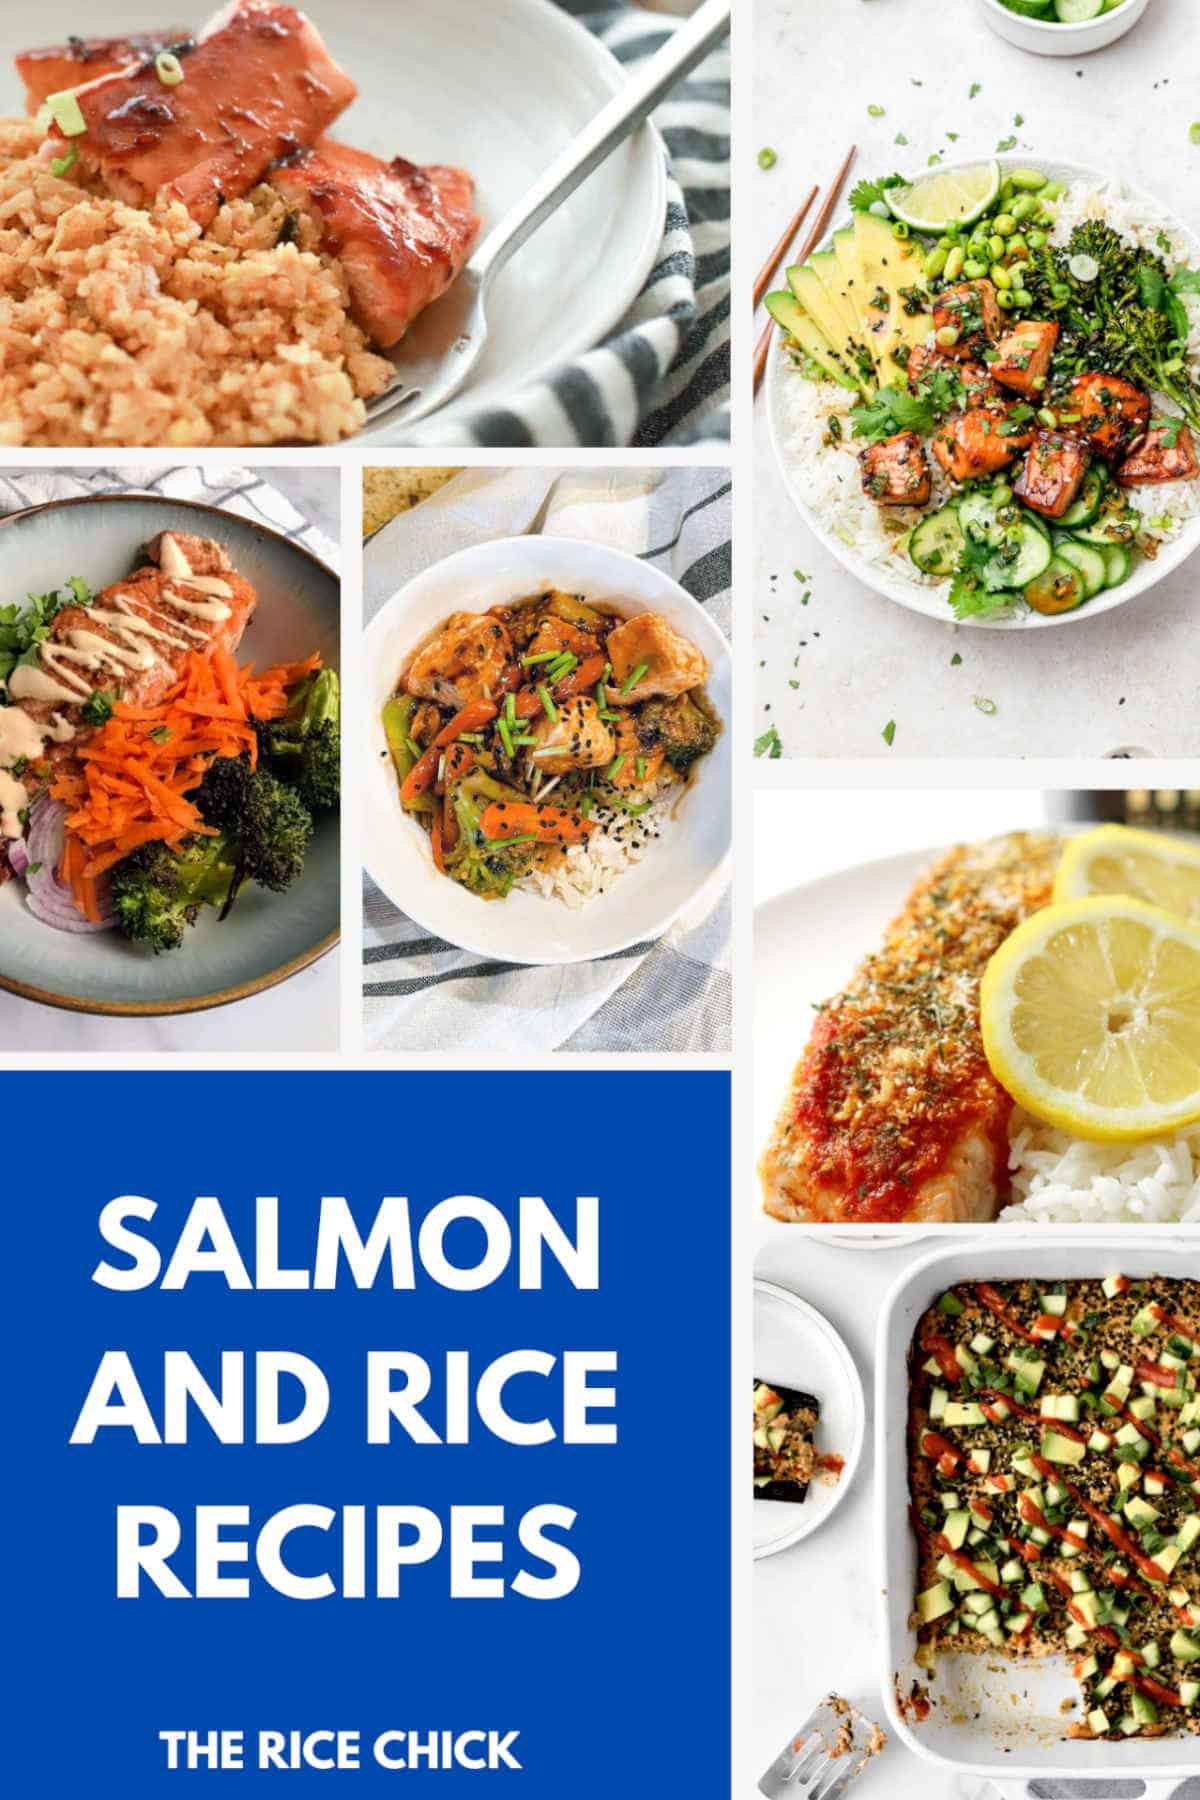 A collection of different images of recipes for salmon and rice.